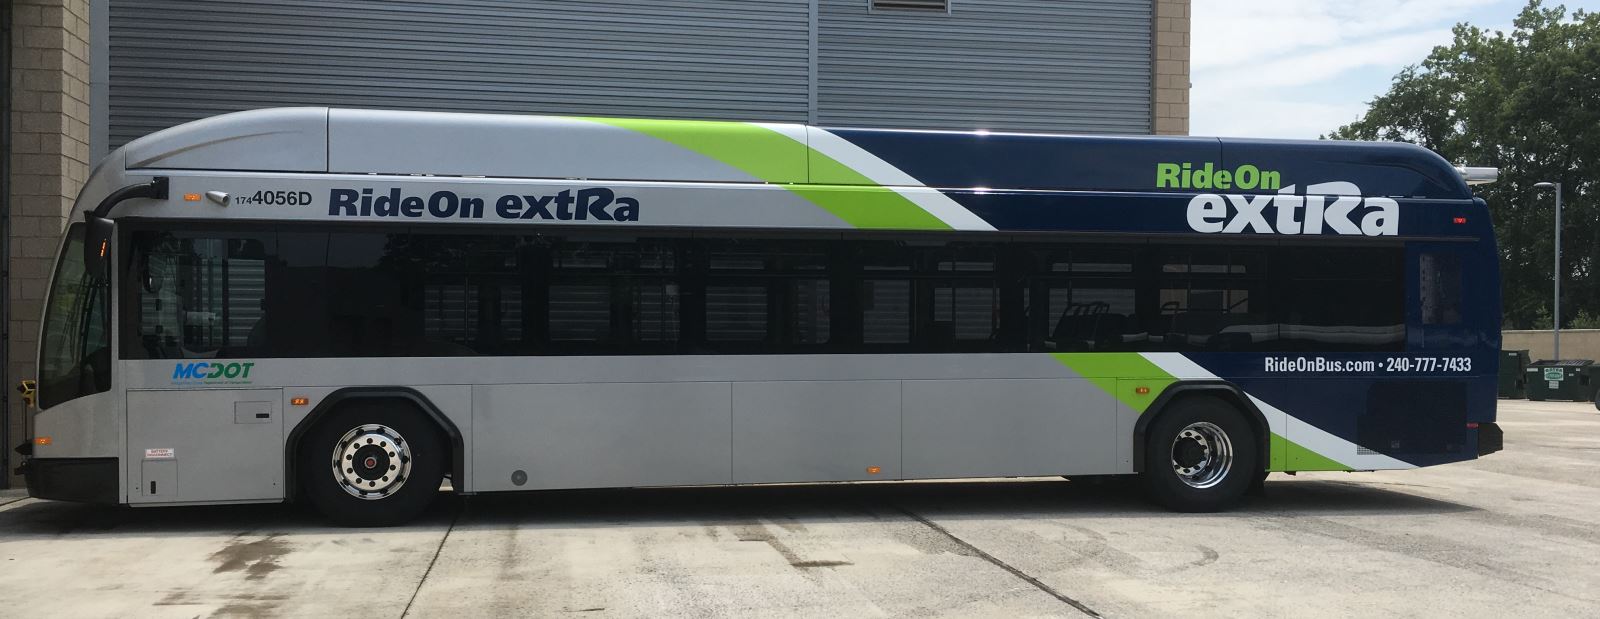 side view of Ride On Extra bus